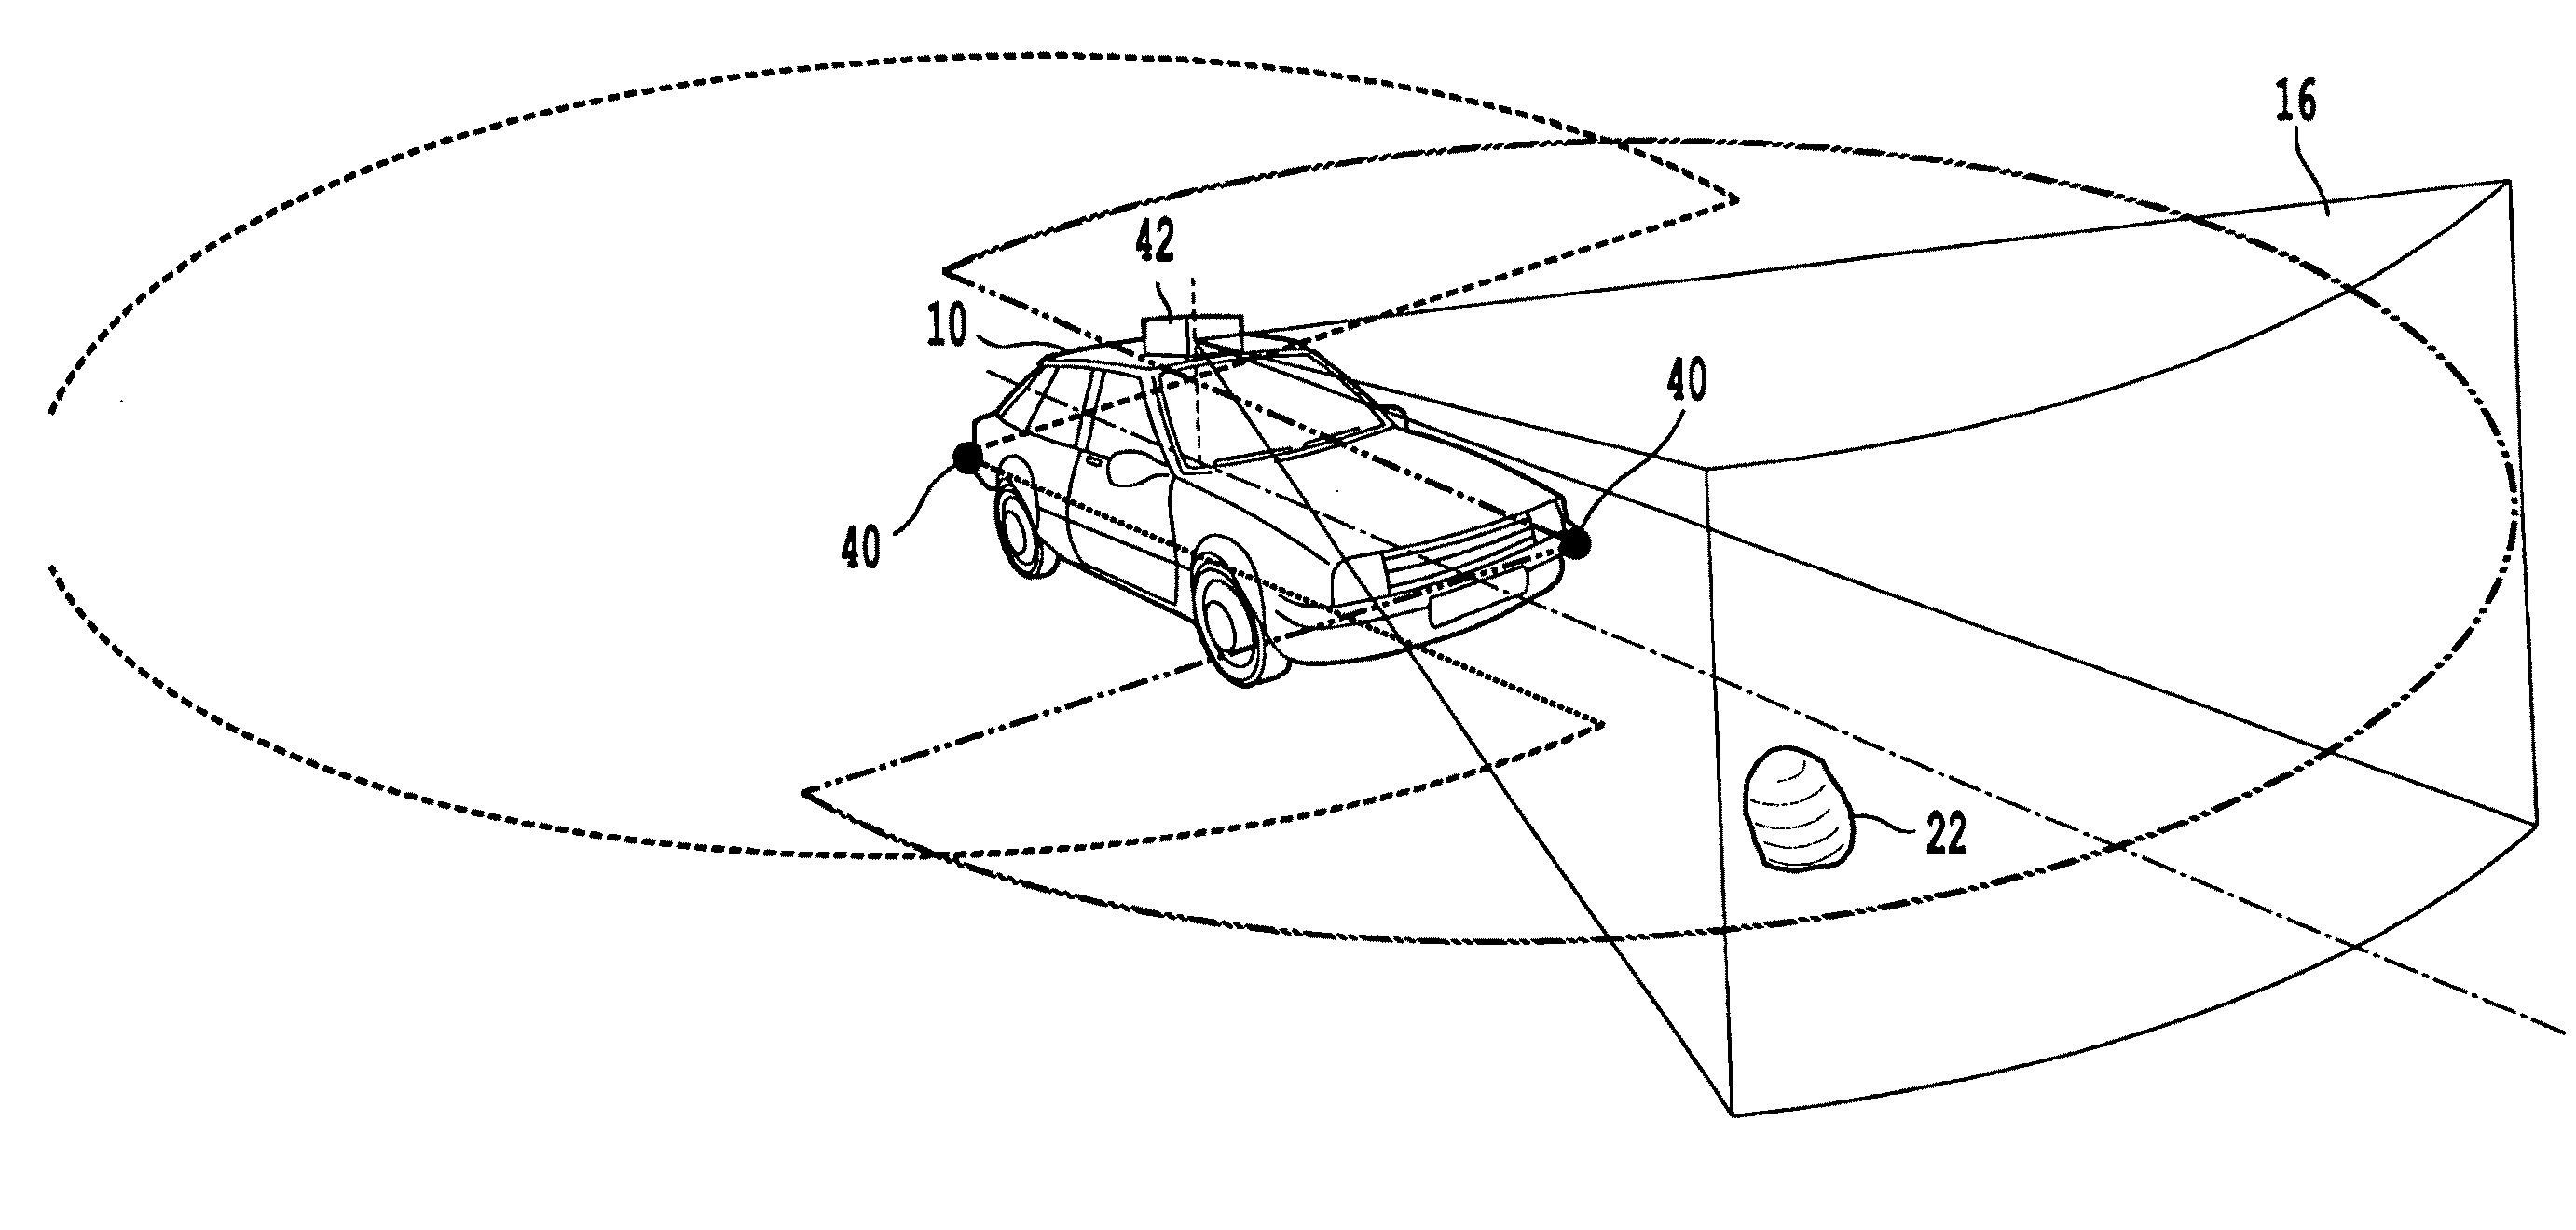 Control and systems for autonomously driven vehicles